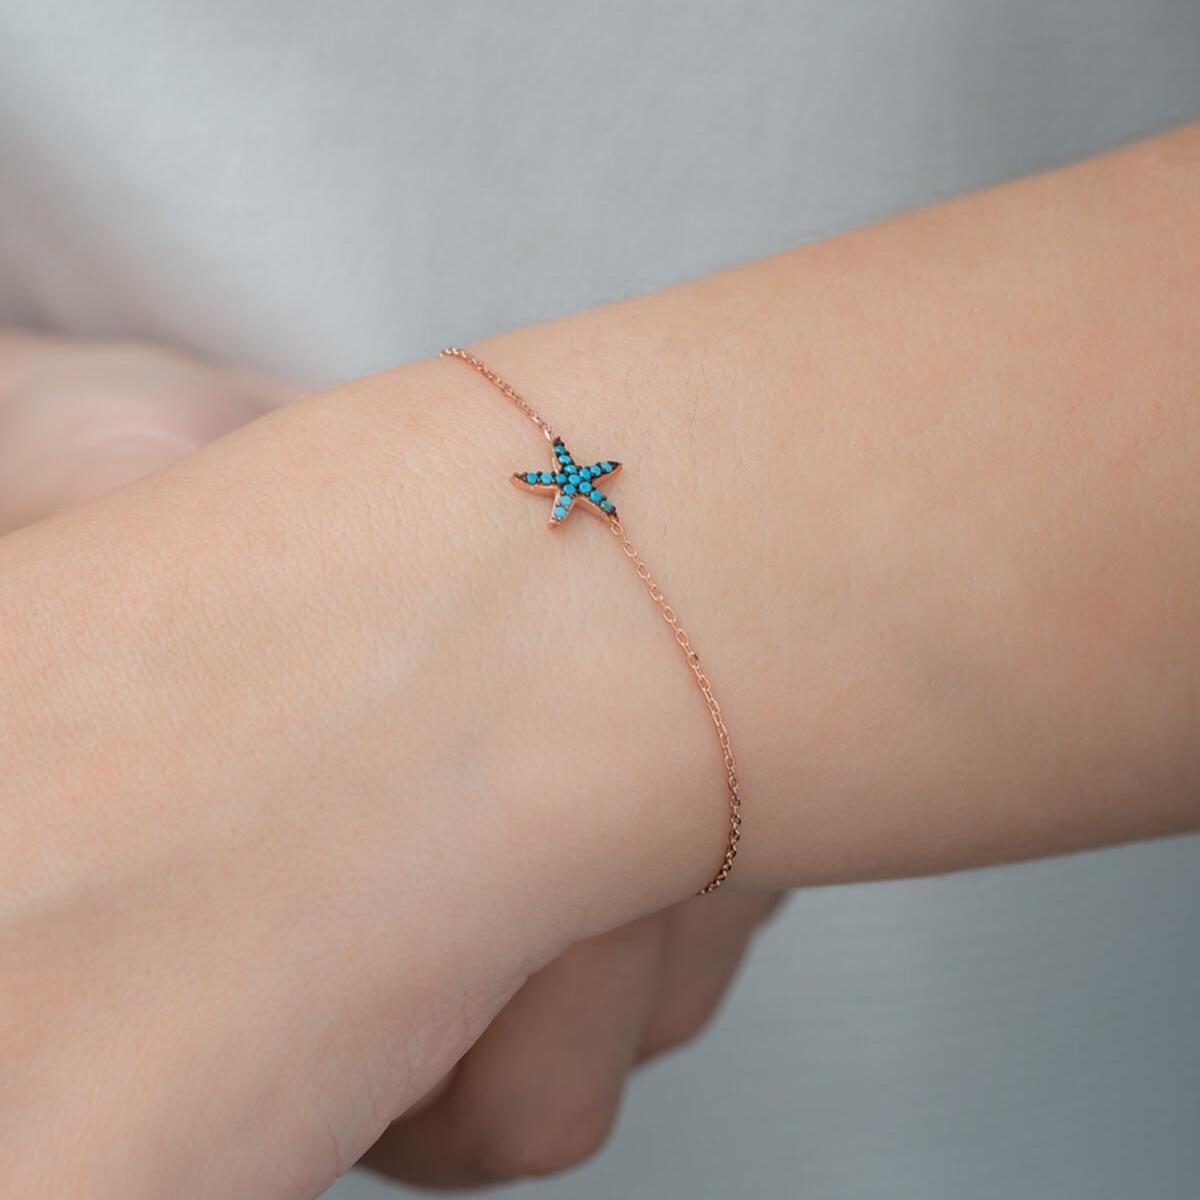 Turquoie Starfish Silver Bracelet • Blue Starfish Braclet - Trending Silver Gifts